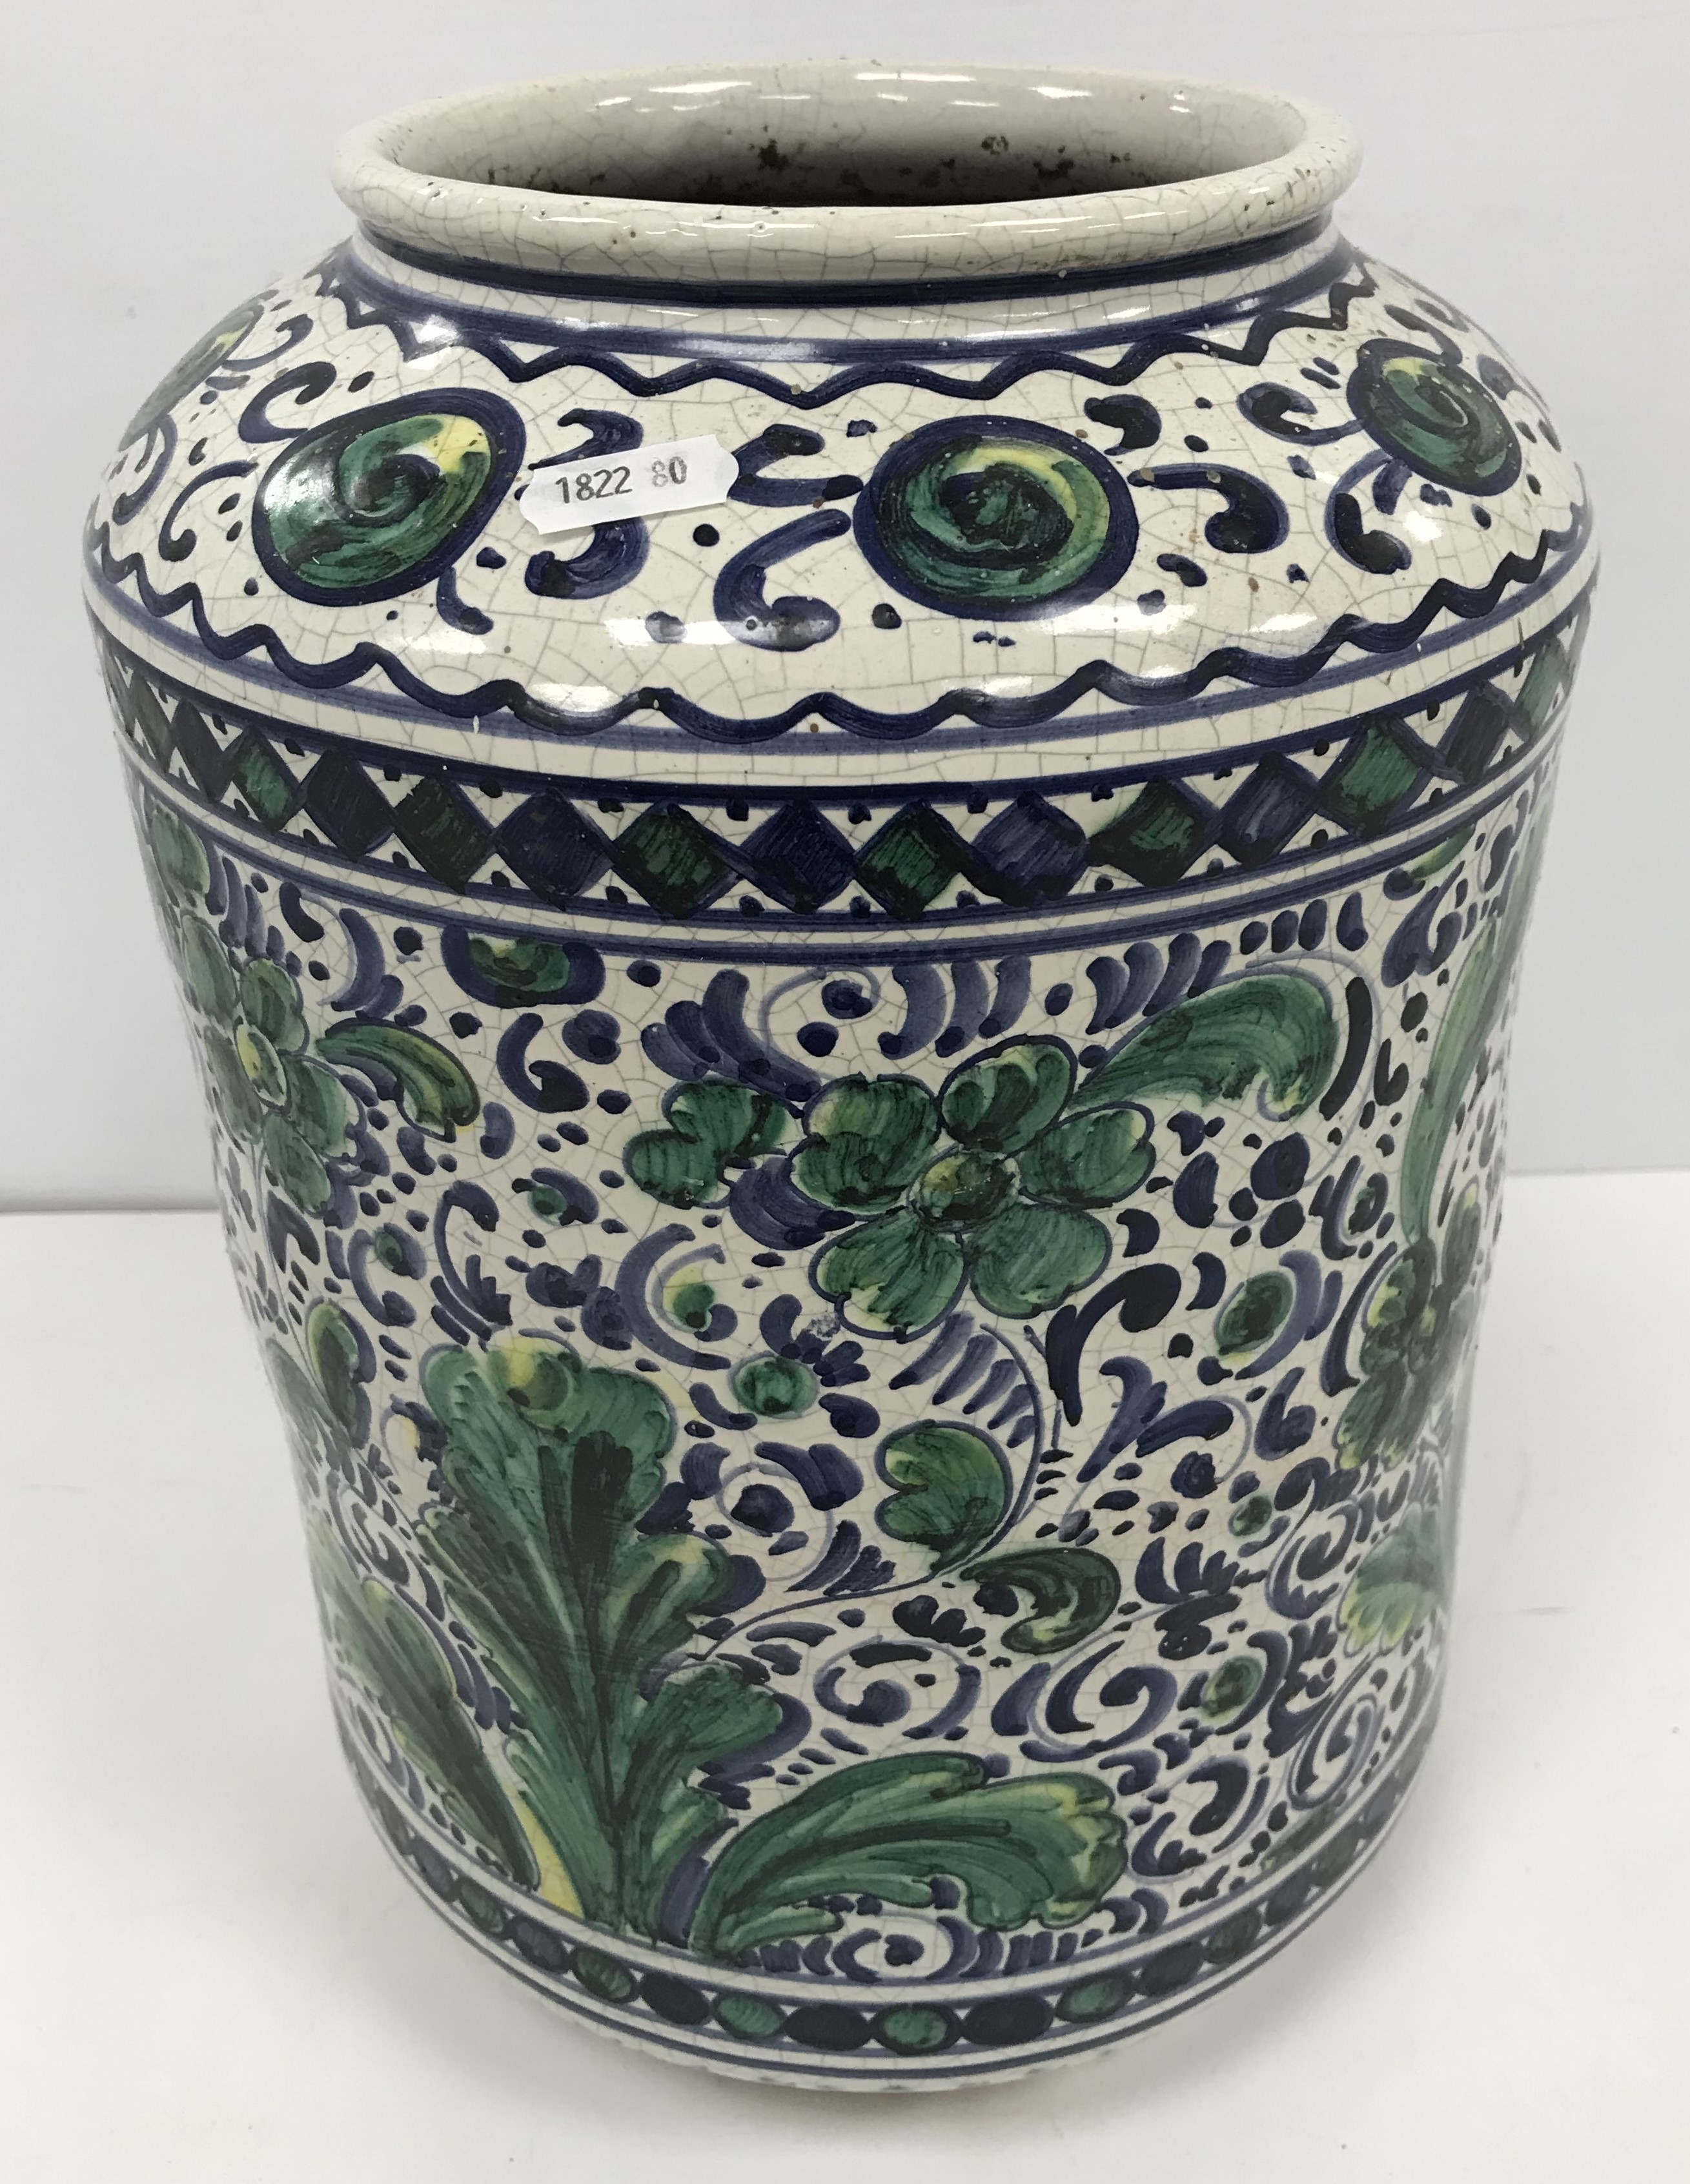 A 20th Century Persian glazed pottery pharmaceutical jar with all over floral and scrolling foliate - Image 2 of 2